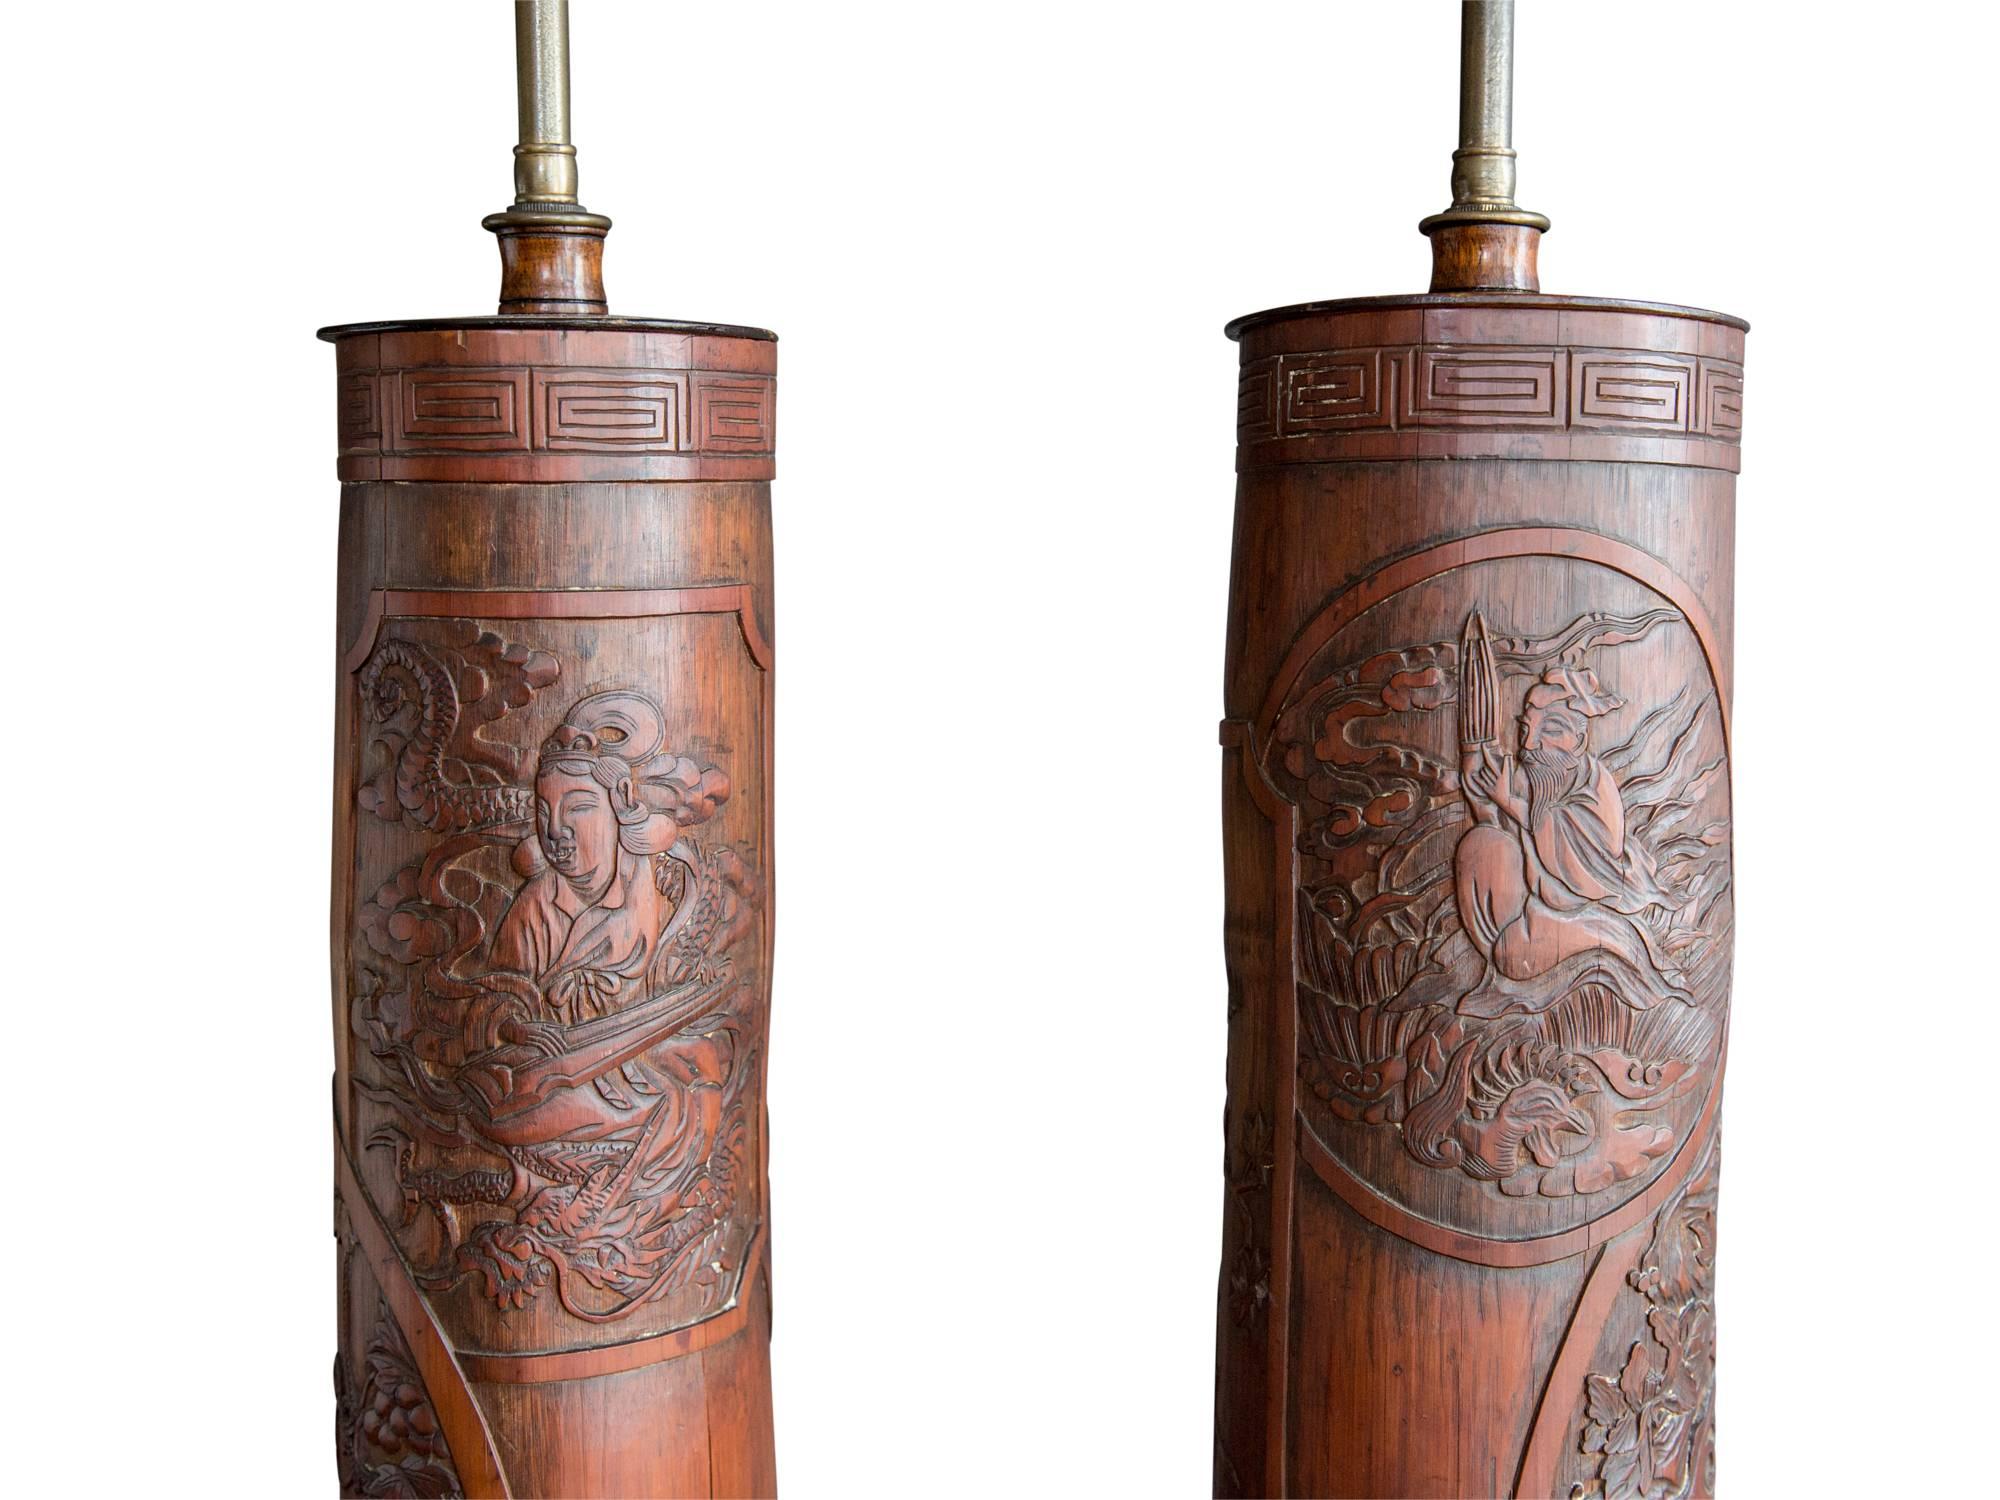 A decorative pair of antique Chinese Export table lamps. Most likely late 19th or early 20th century. Featuring carved bamboo shafts with classic motifs such as a scholar and musician, dragons, and birds. Mounted on hexagonal black lacquer bases and